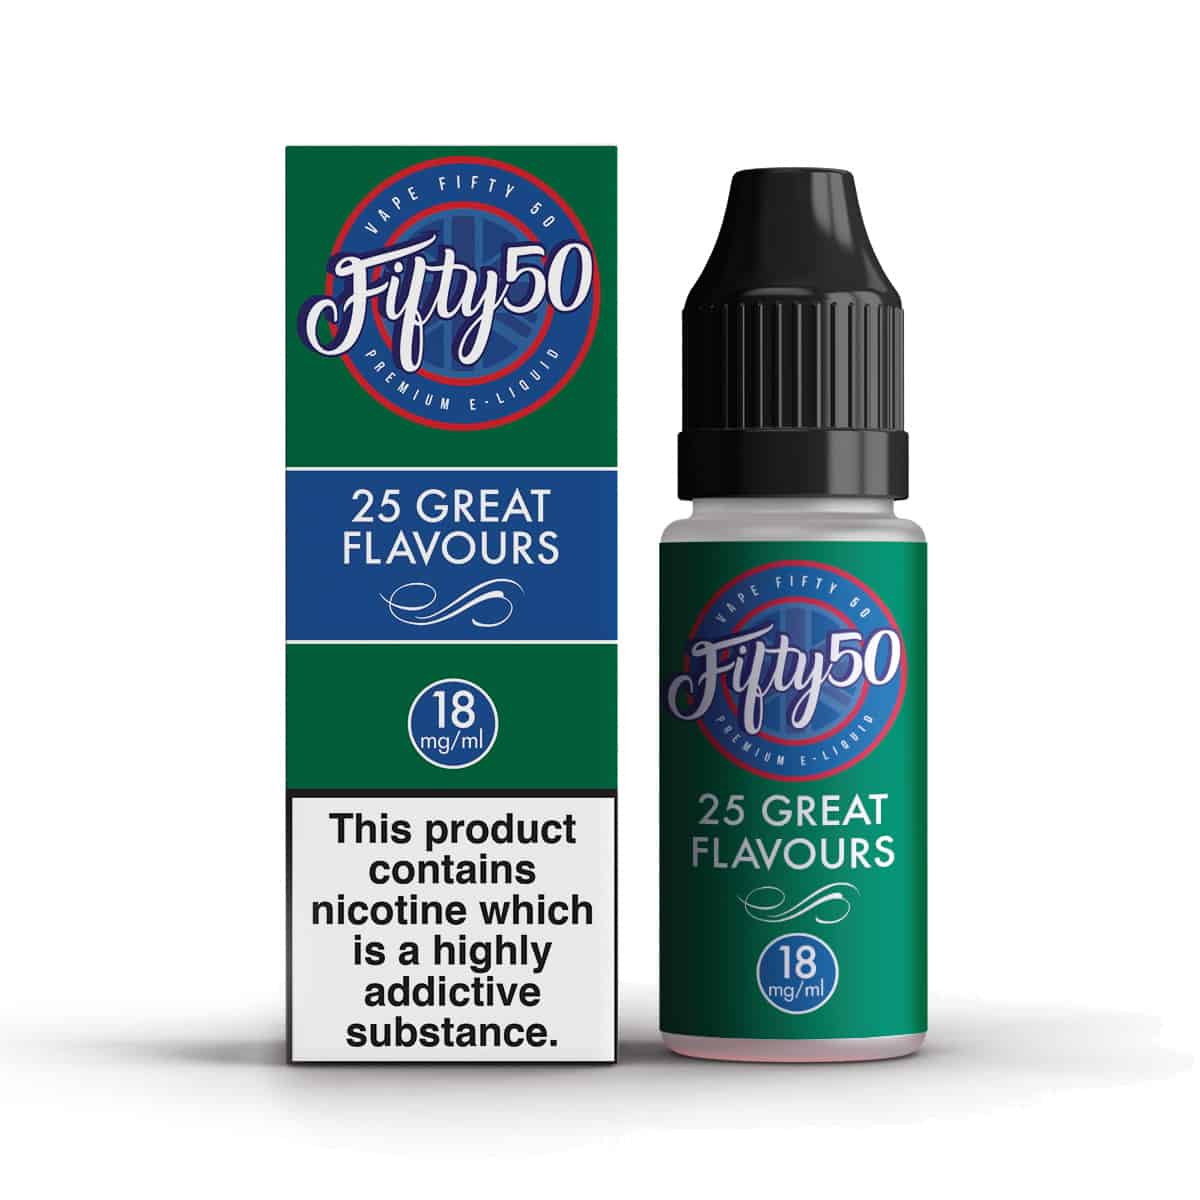 United kingdom UK First Eliquid Subscription Service Vape Made Simple offering Disposables, Freebase, Nic salts -  with a wide variety of disposables Lost Mary Crystal Bar Elf Disposables - 50 Fifty Ice Menthol 18mg